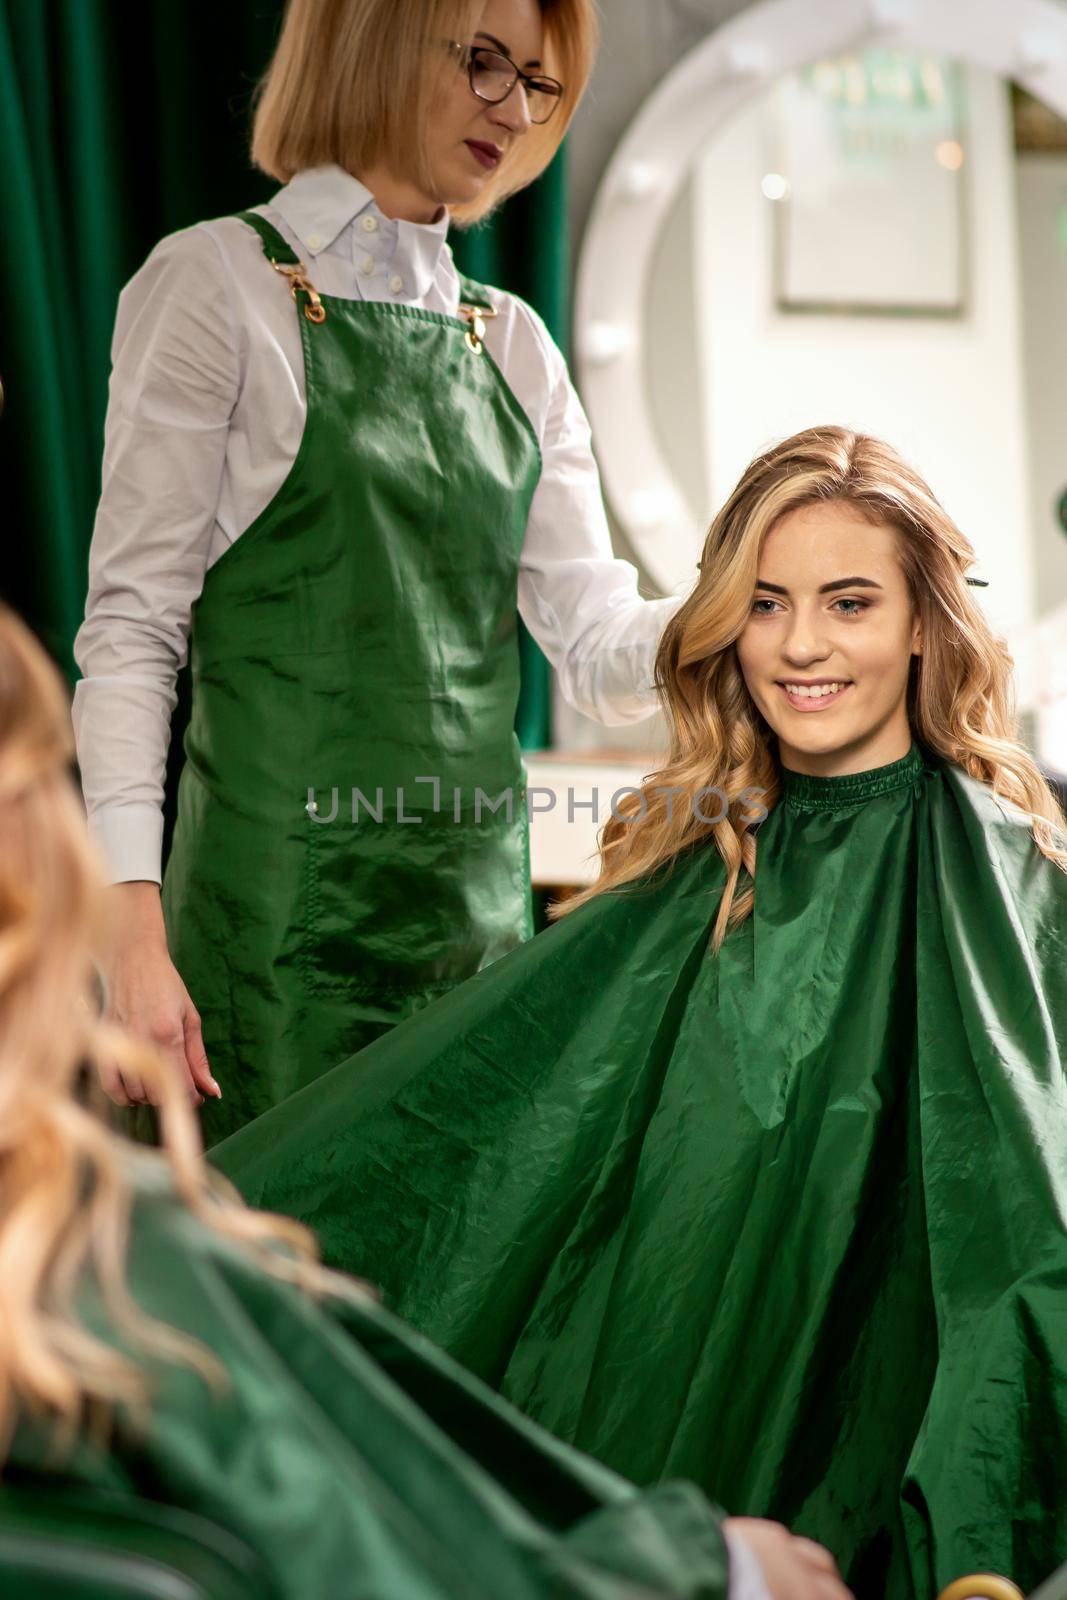 Hairdresser combing long hair of young caucasian woman looking and smiling in the mirror in beauty salon